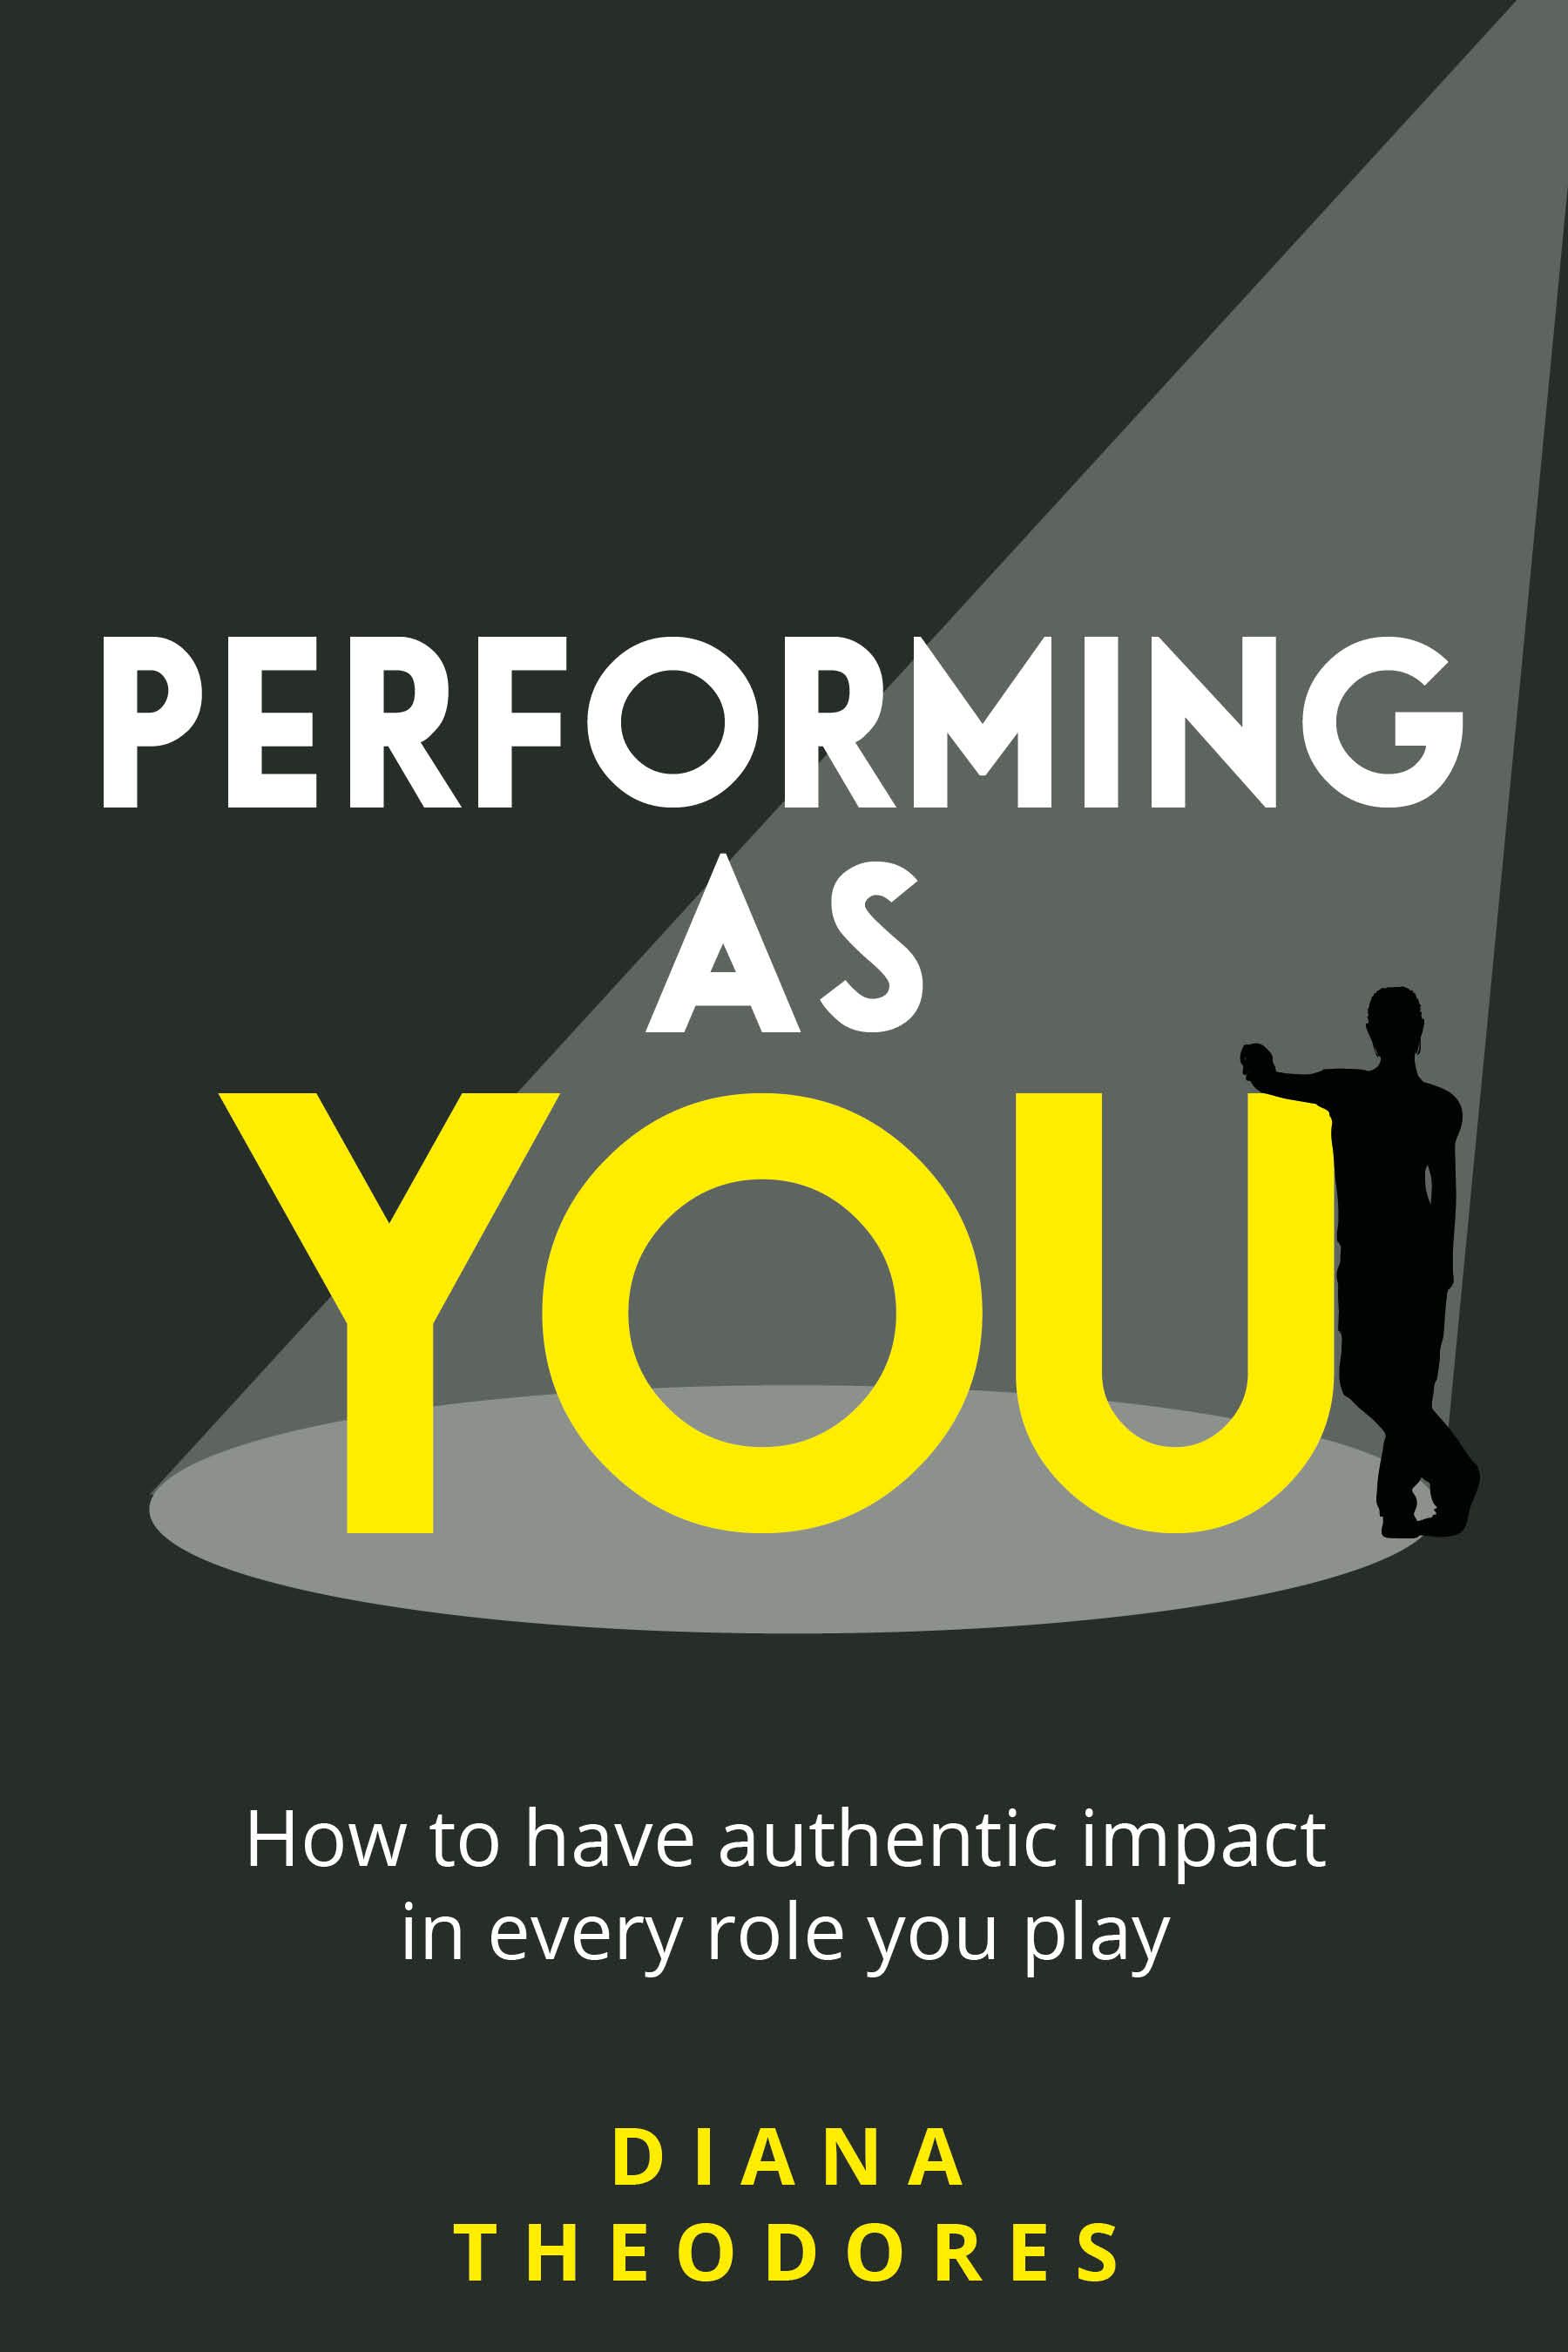 Performing-As-Your-Cover-LARGE-EBOOK